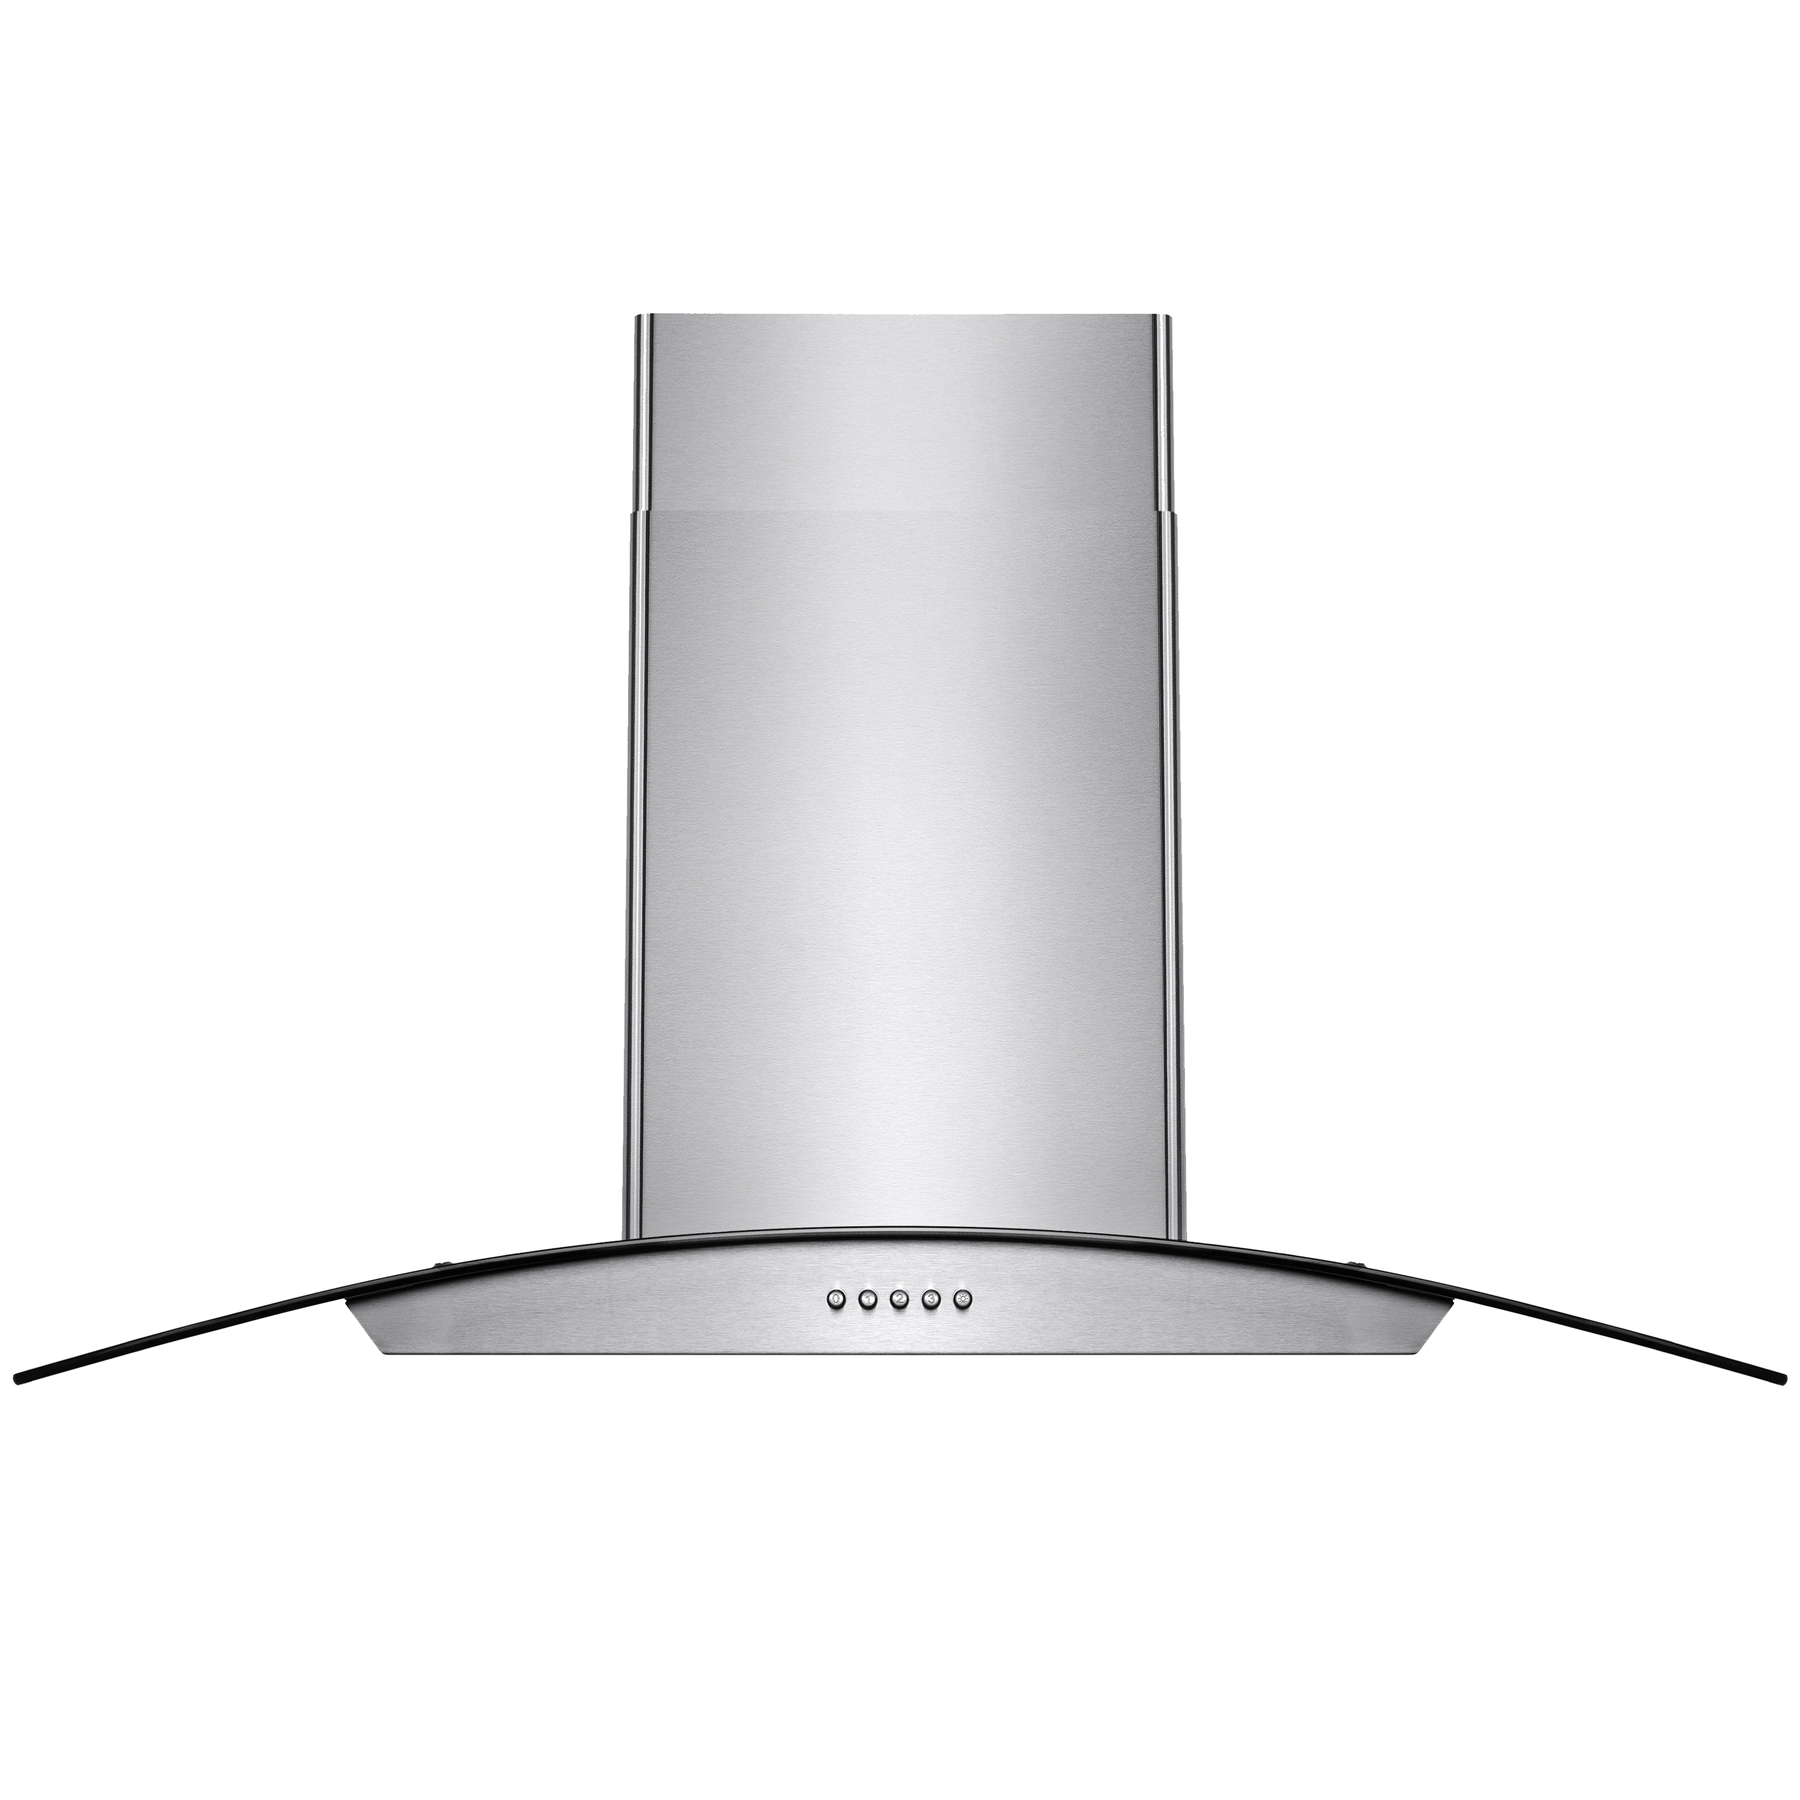 AKDY 36" Stainless Steel Tempered Glass Wall Mount Kitchen Vent Range Hood Push Buttons w/ Mesh Filter LED Lights - image 3 of 14